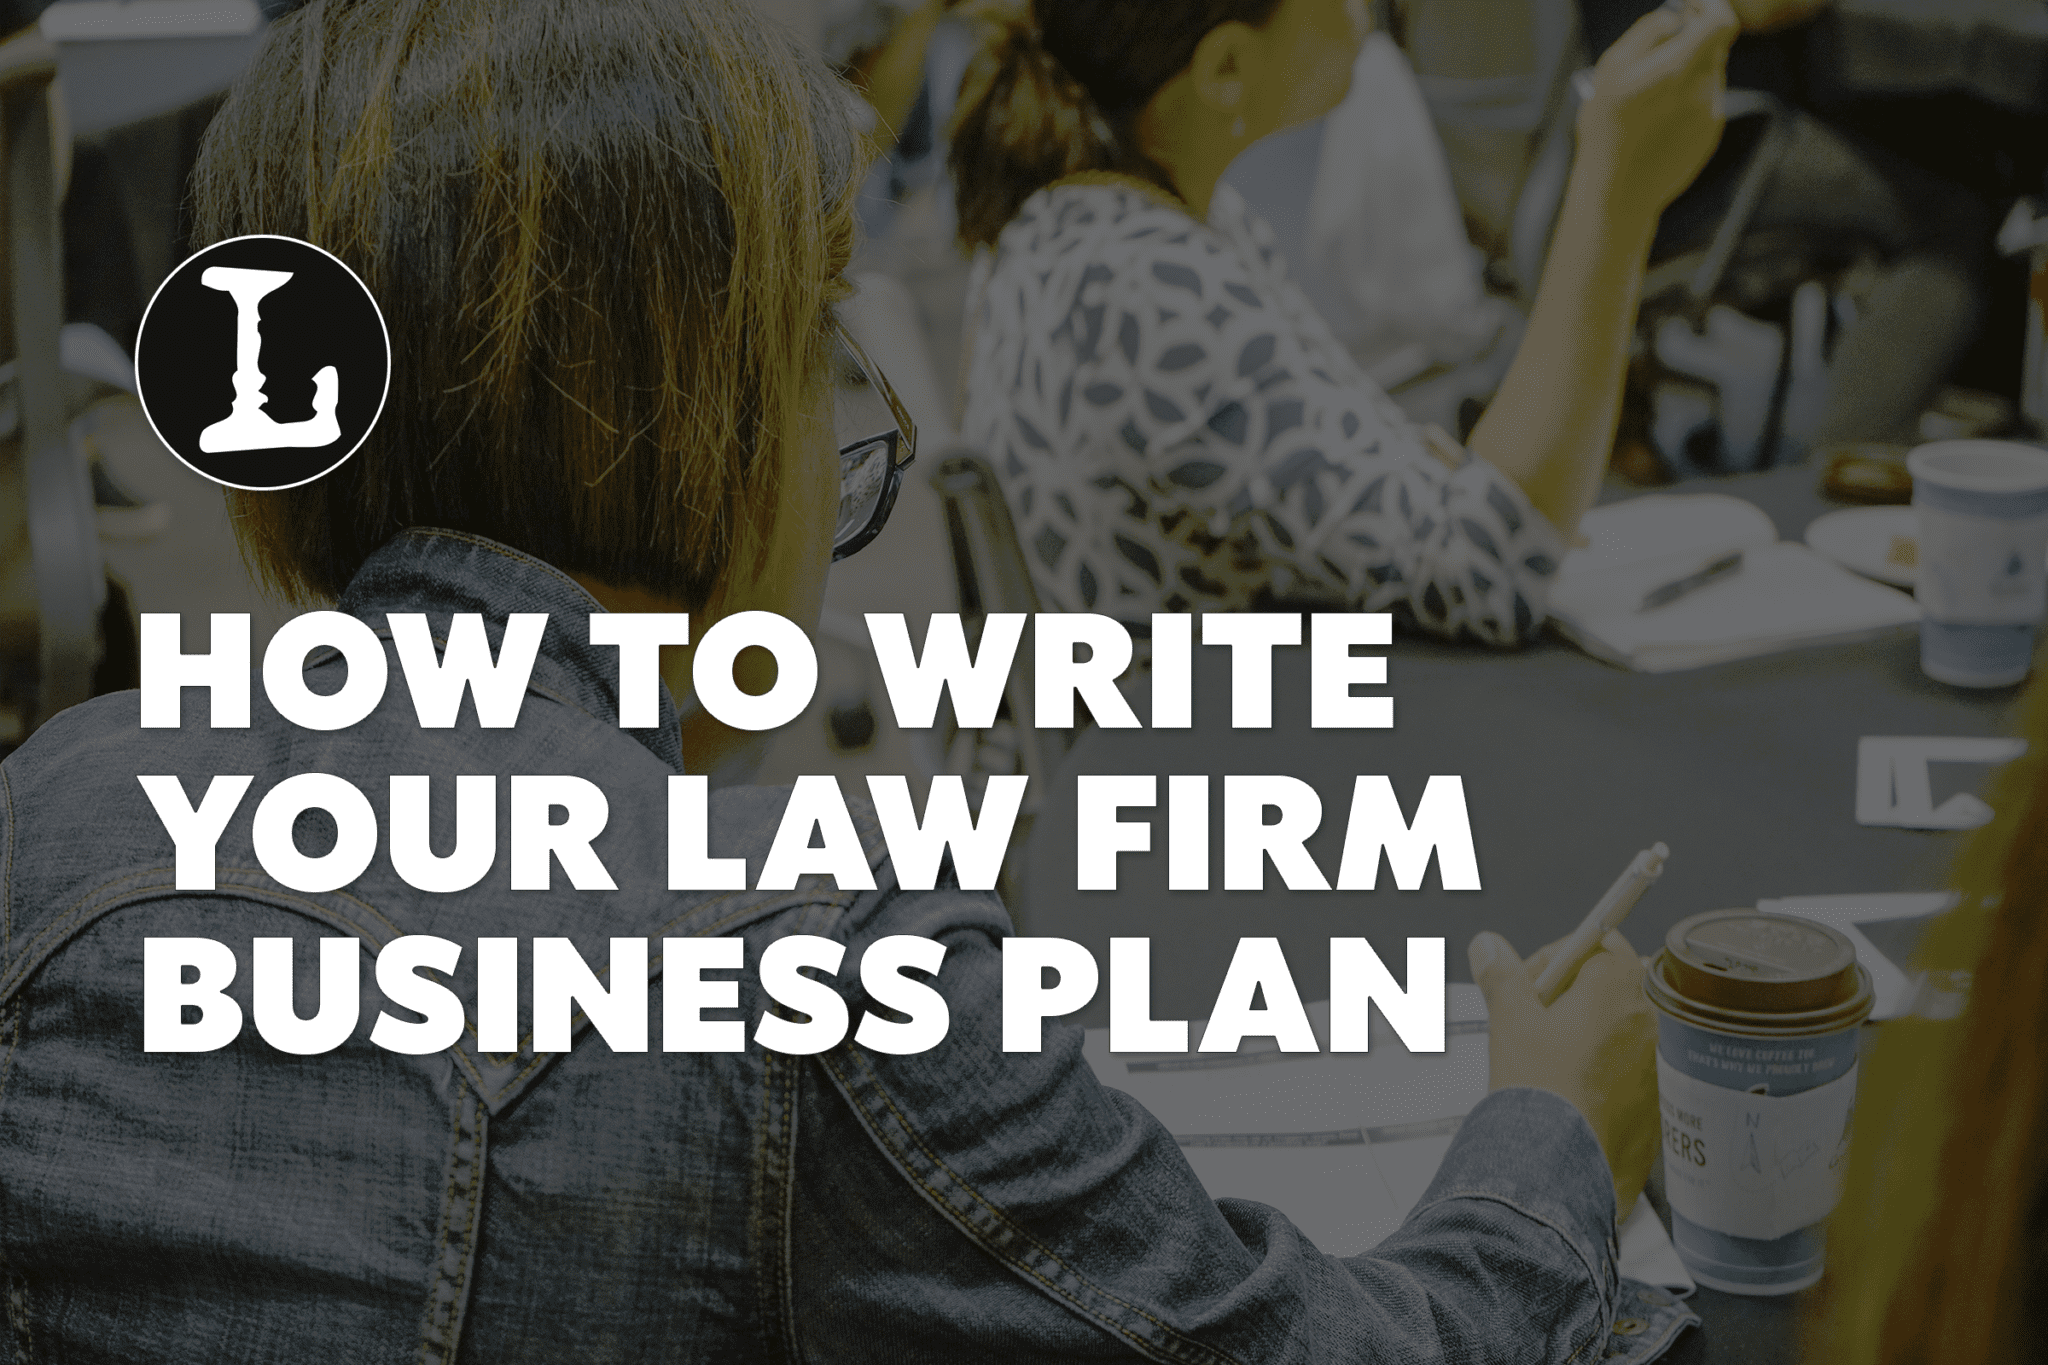 law firm practice group business plan